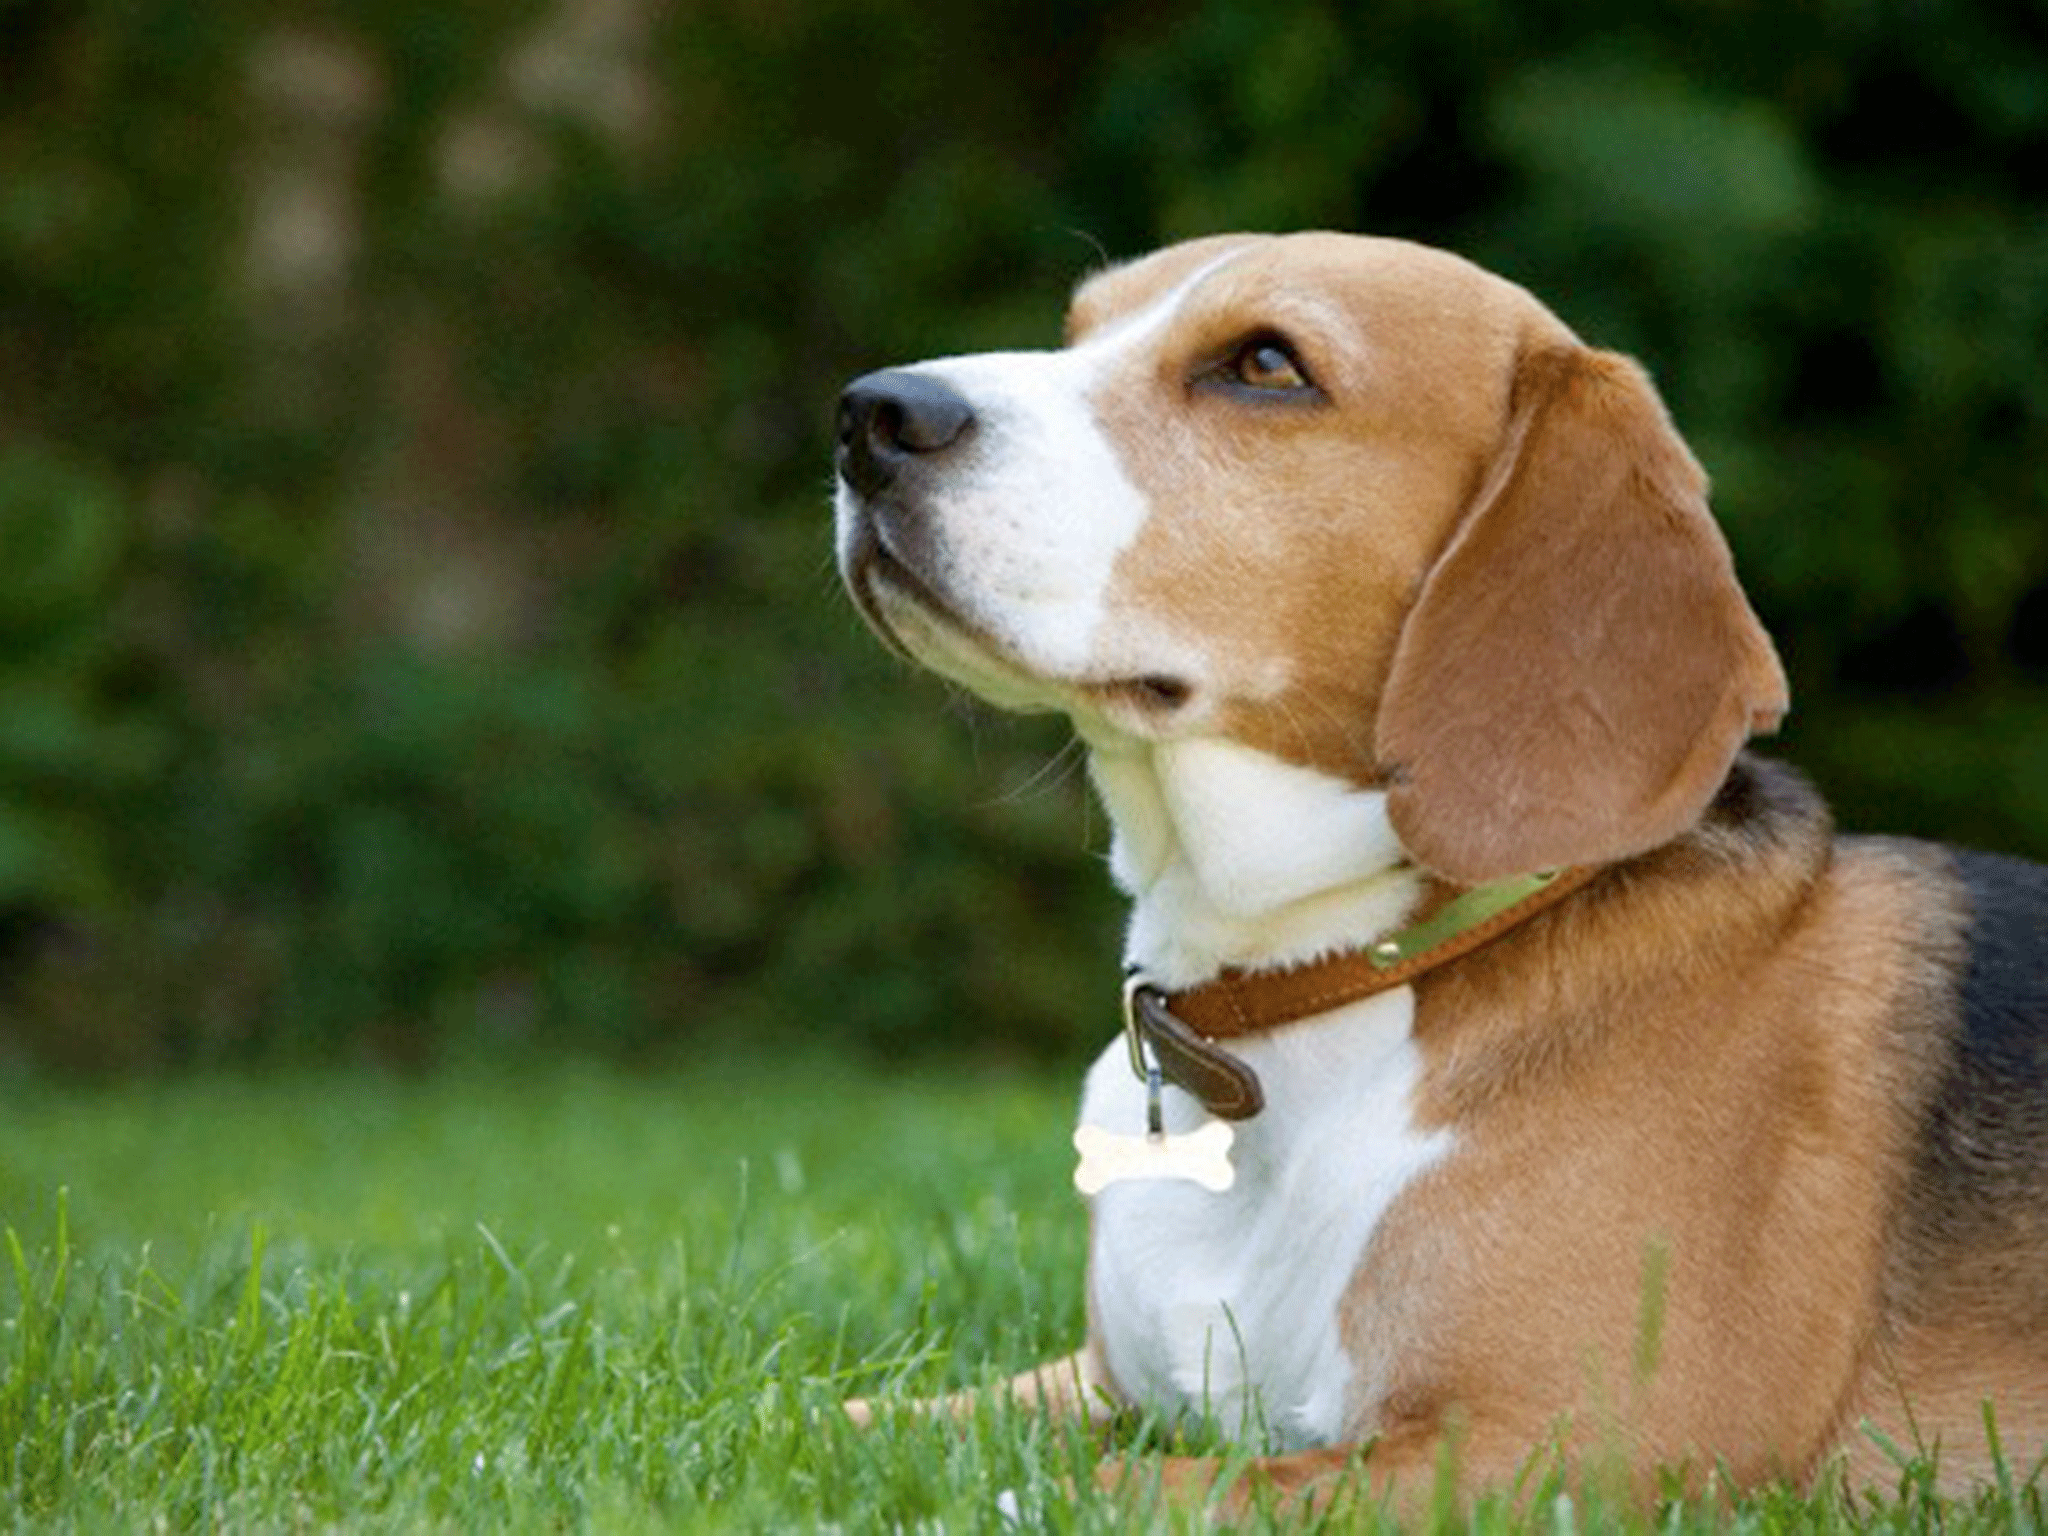 Animal rights campaigners have condemned Government decision to give the go-ahead to a facility which will breed beagles for experiments (file image)